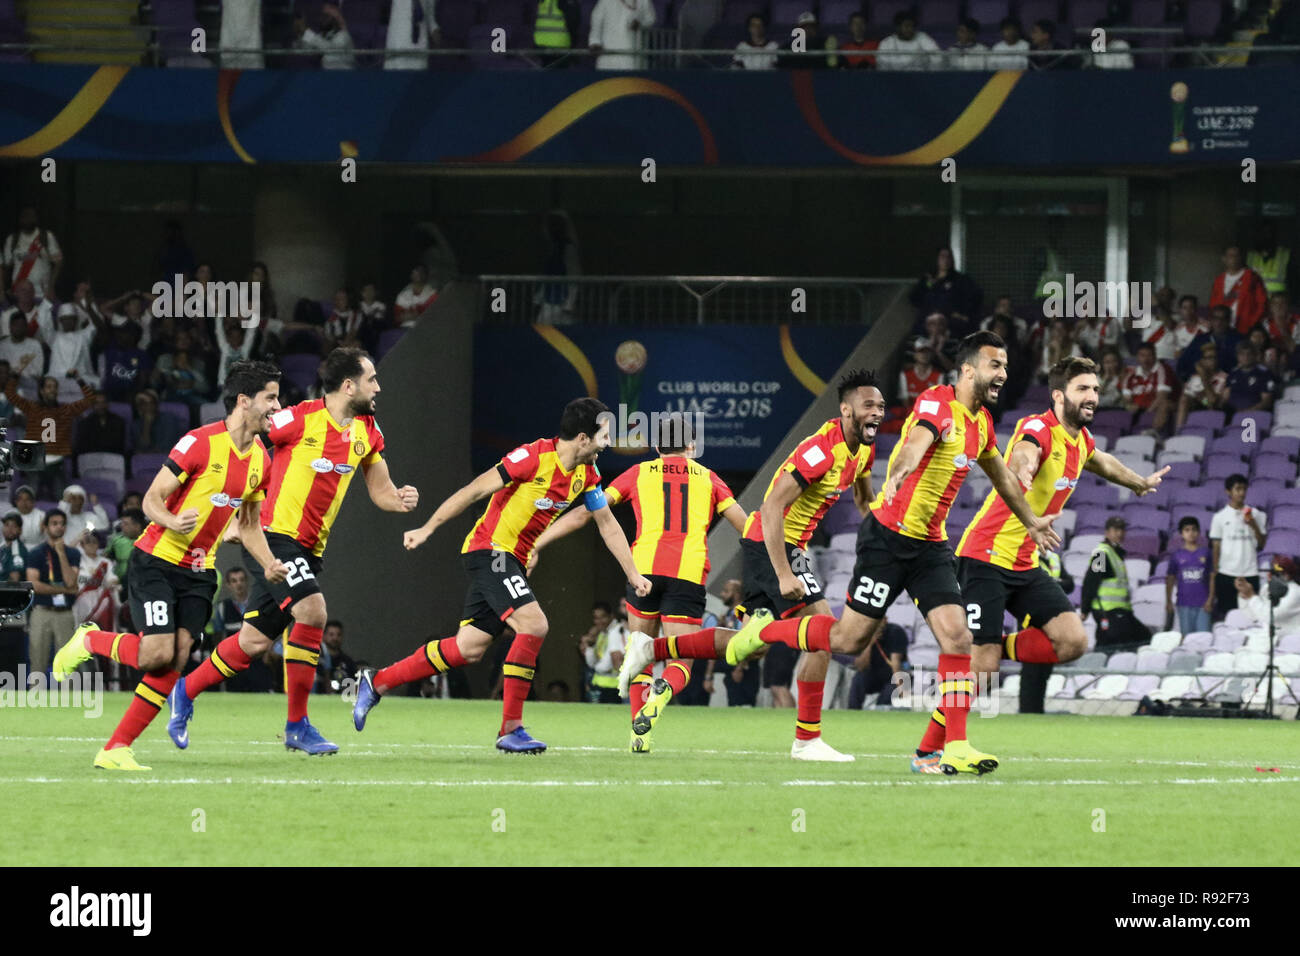 Al Ain, United Arab Emirates. 18th Dec, 2018. Es Tunis players celebrate after the FIFA Club World Cup fifth place soccer match between ES Tunis and CD Guadalajara at Hazza Bin Zayed Stadium. Credit: Mohamed Flis/dpa/Alamy Live News Stock Photo